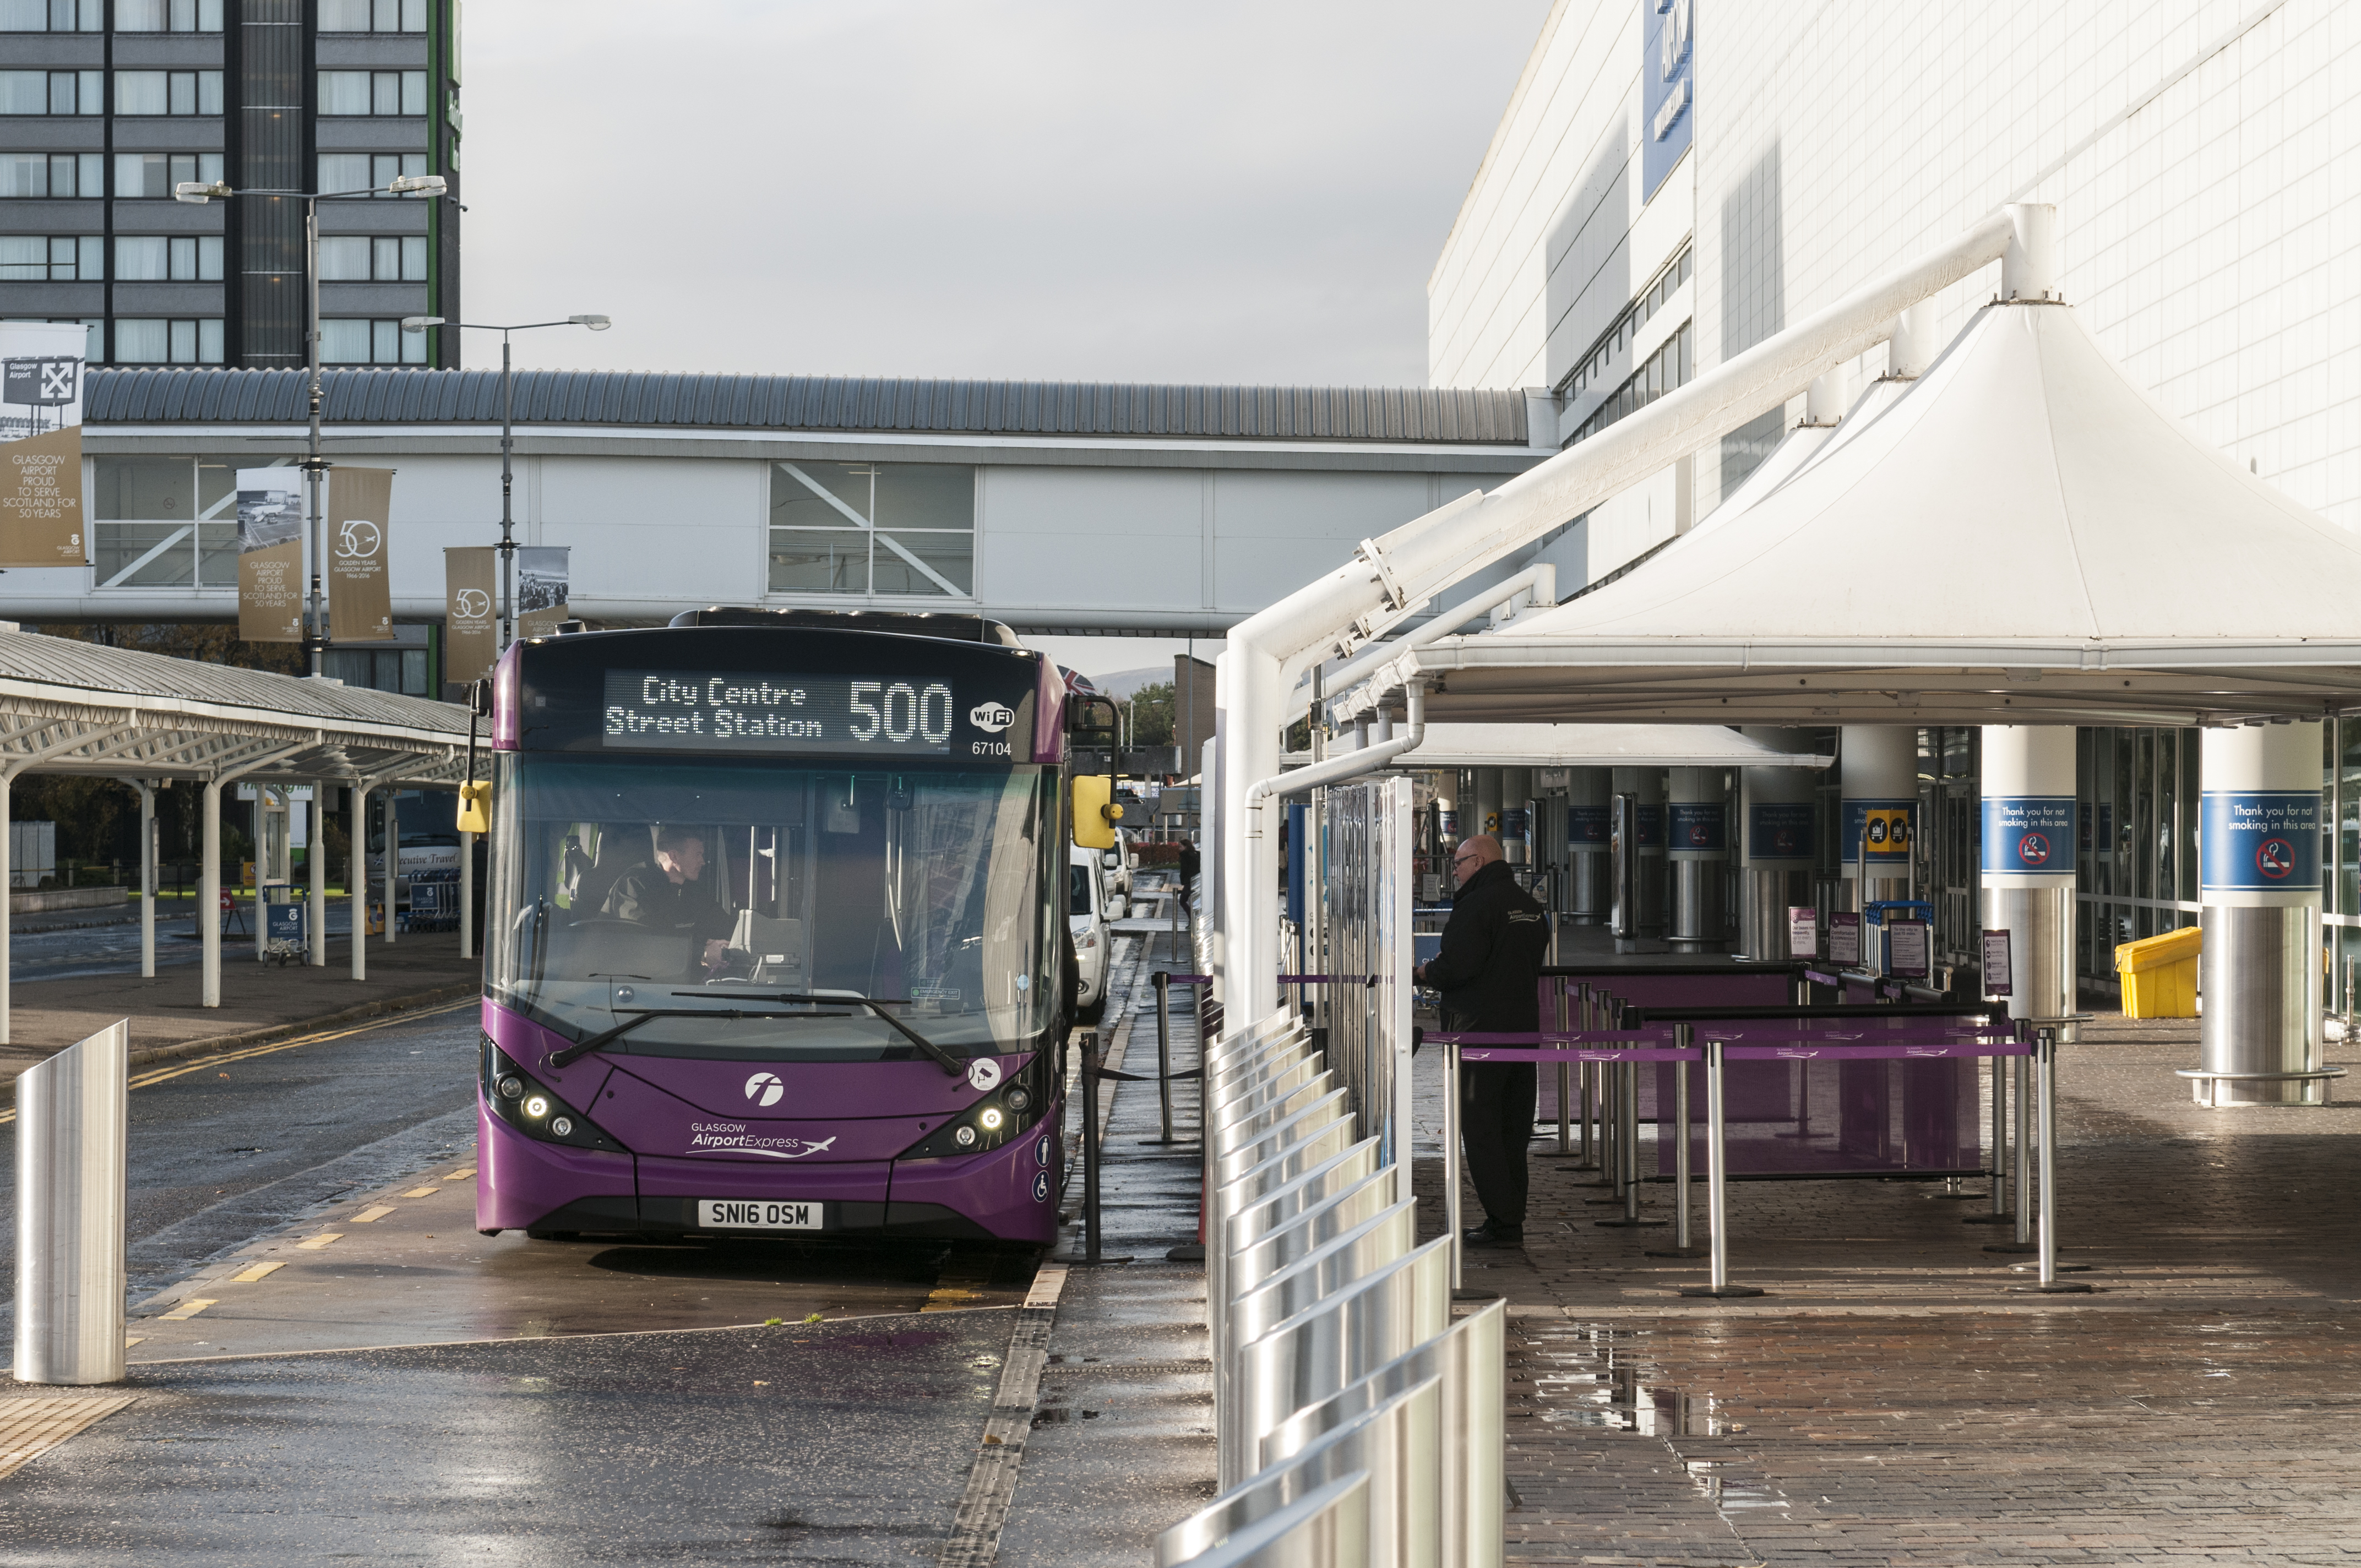 16-11-16-Glasgow Airport Express-RR2 7304